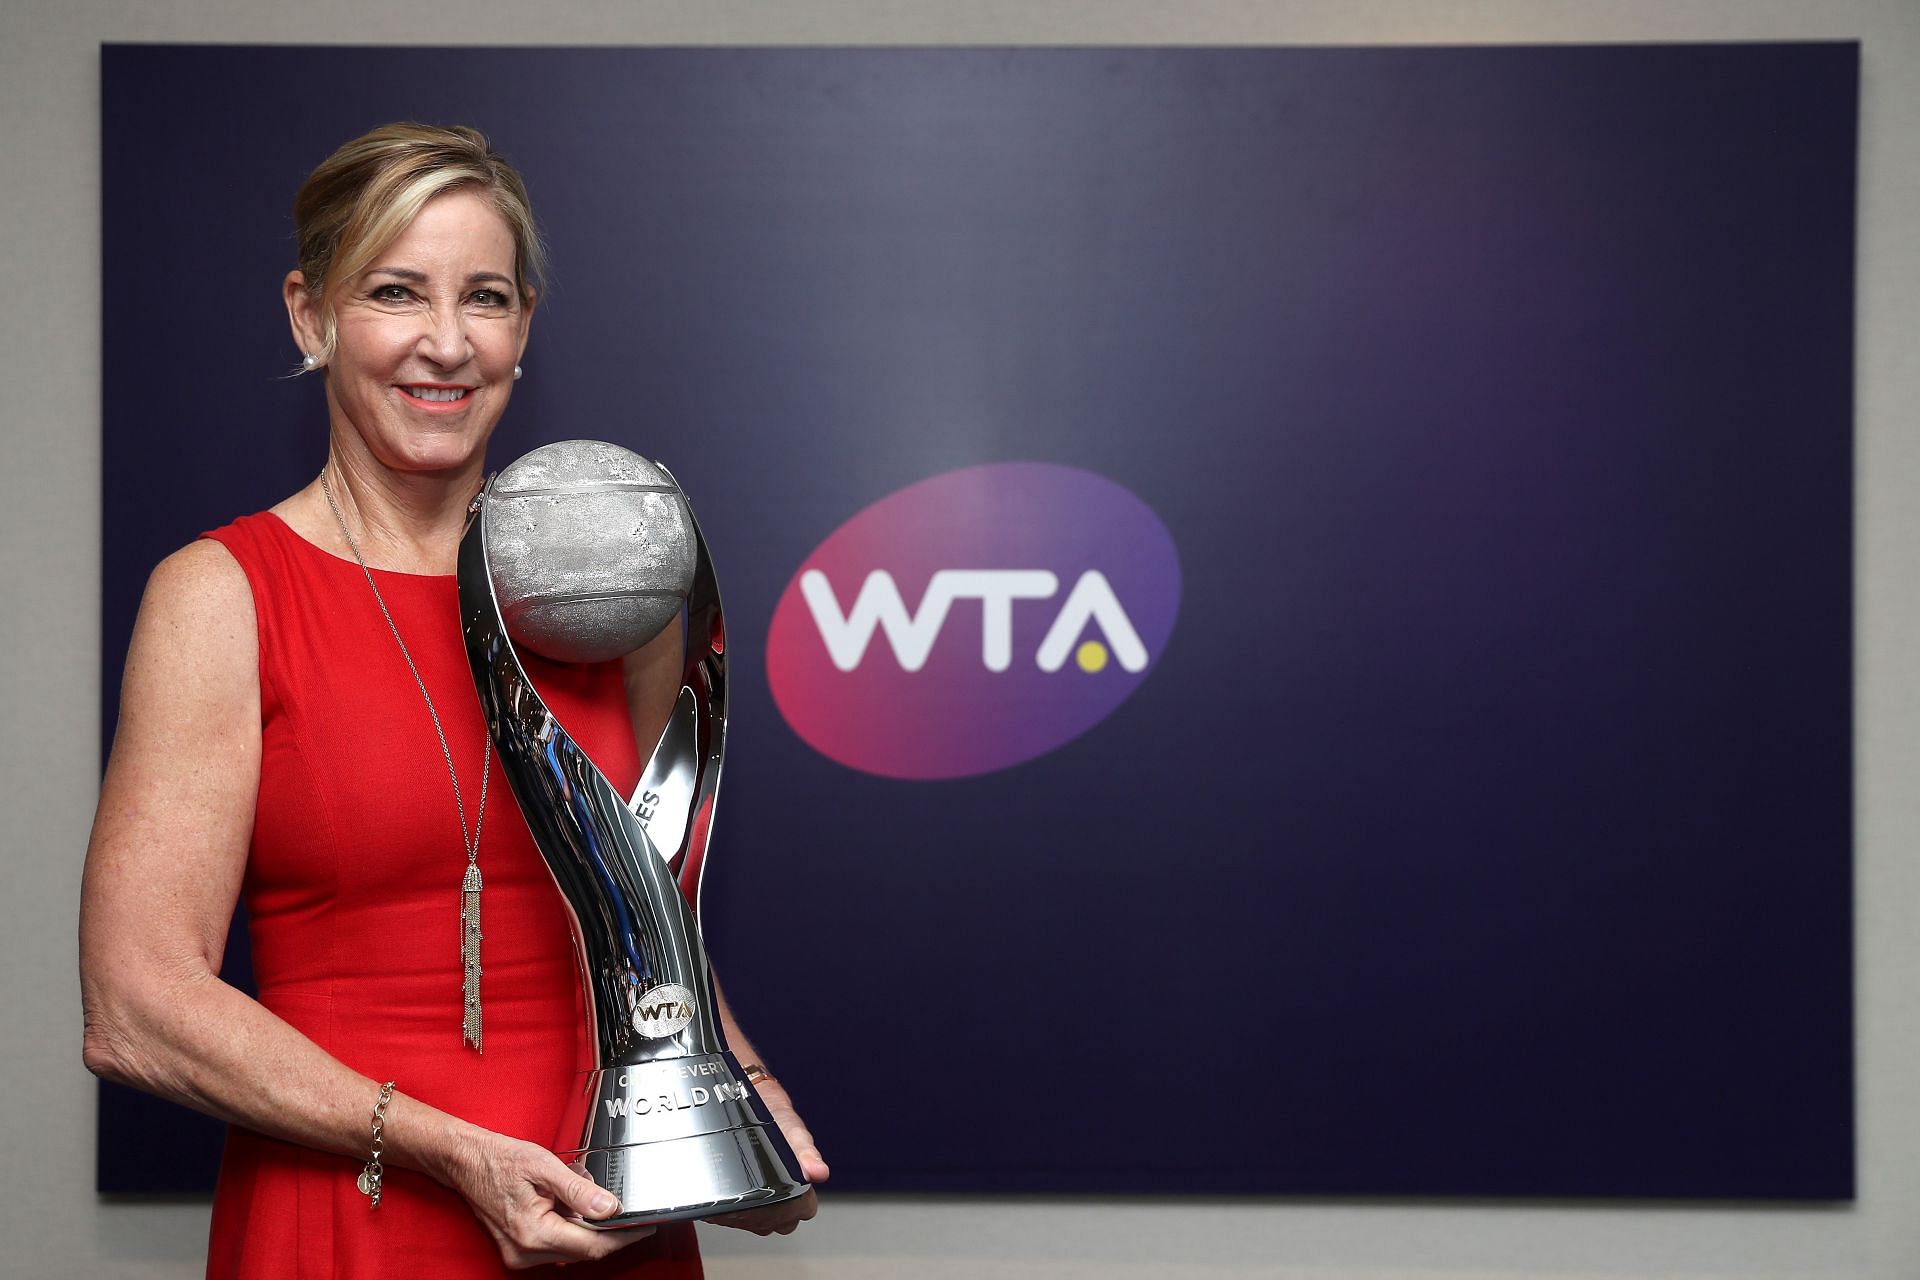 Chris Evert poses with the WTA World Number One singles trophy named in her honor